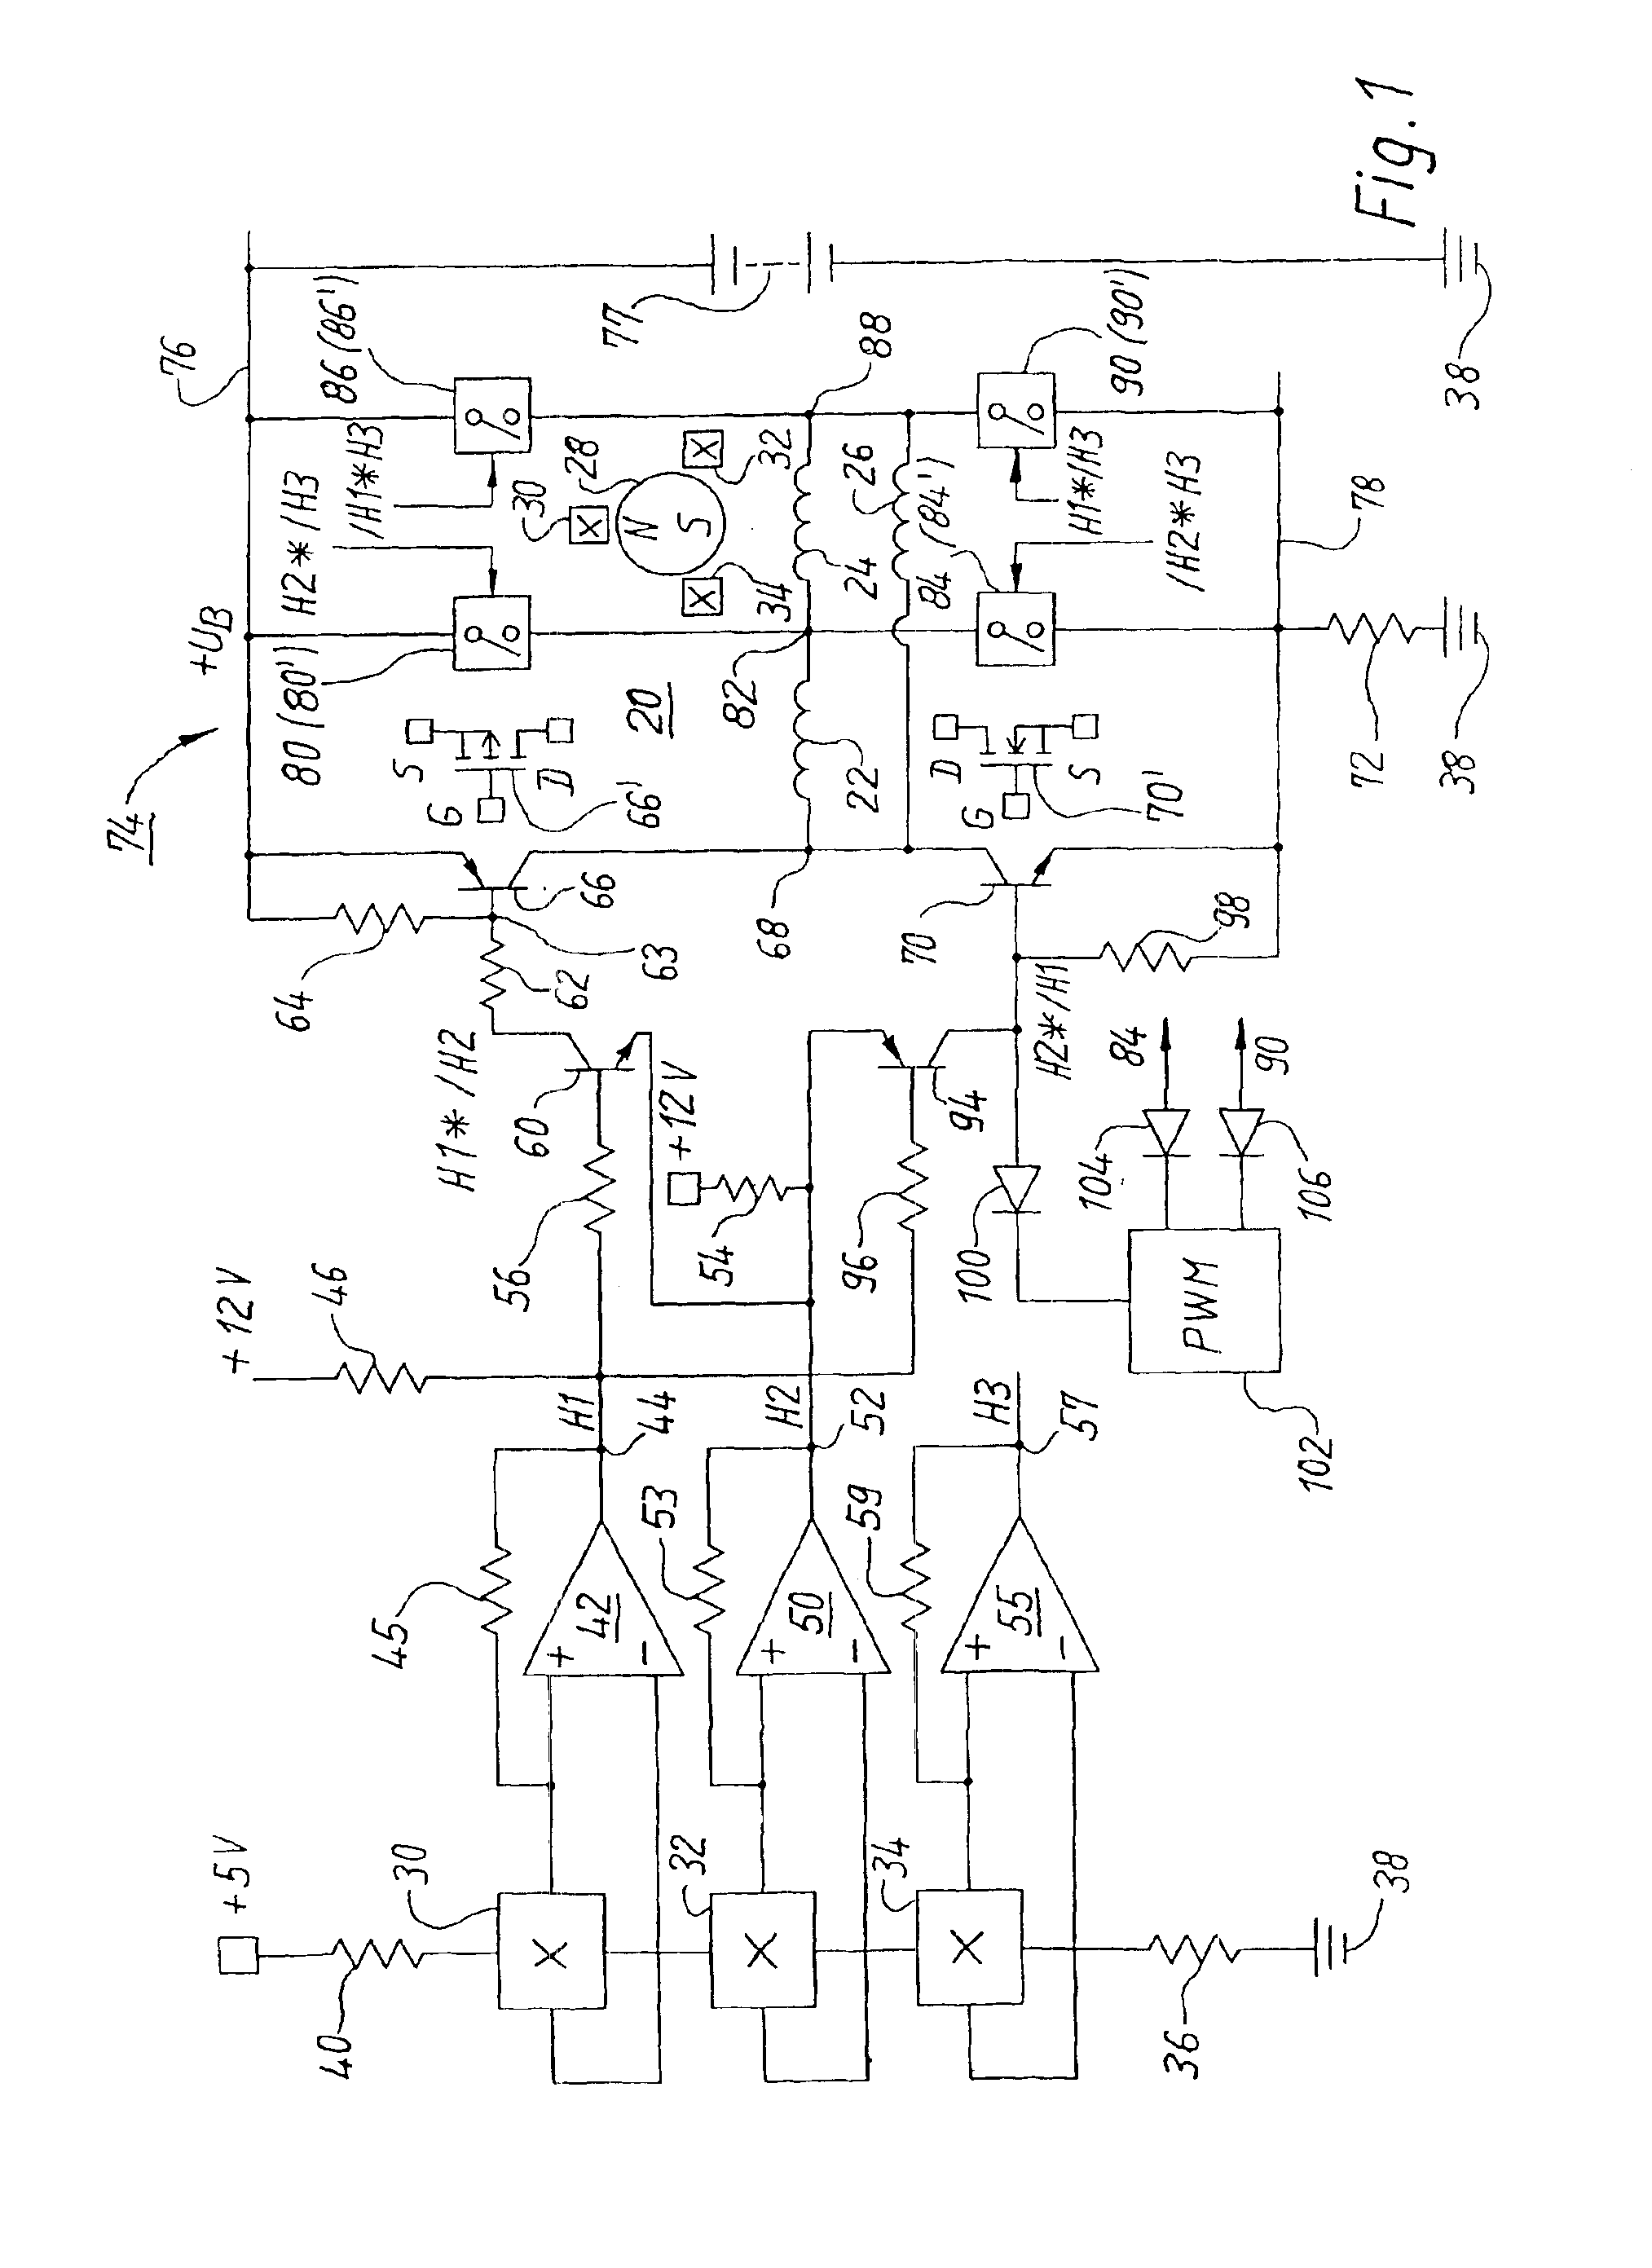 Electronically commutated DC motor comprising a bridge circuit